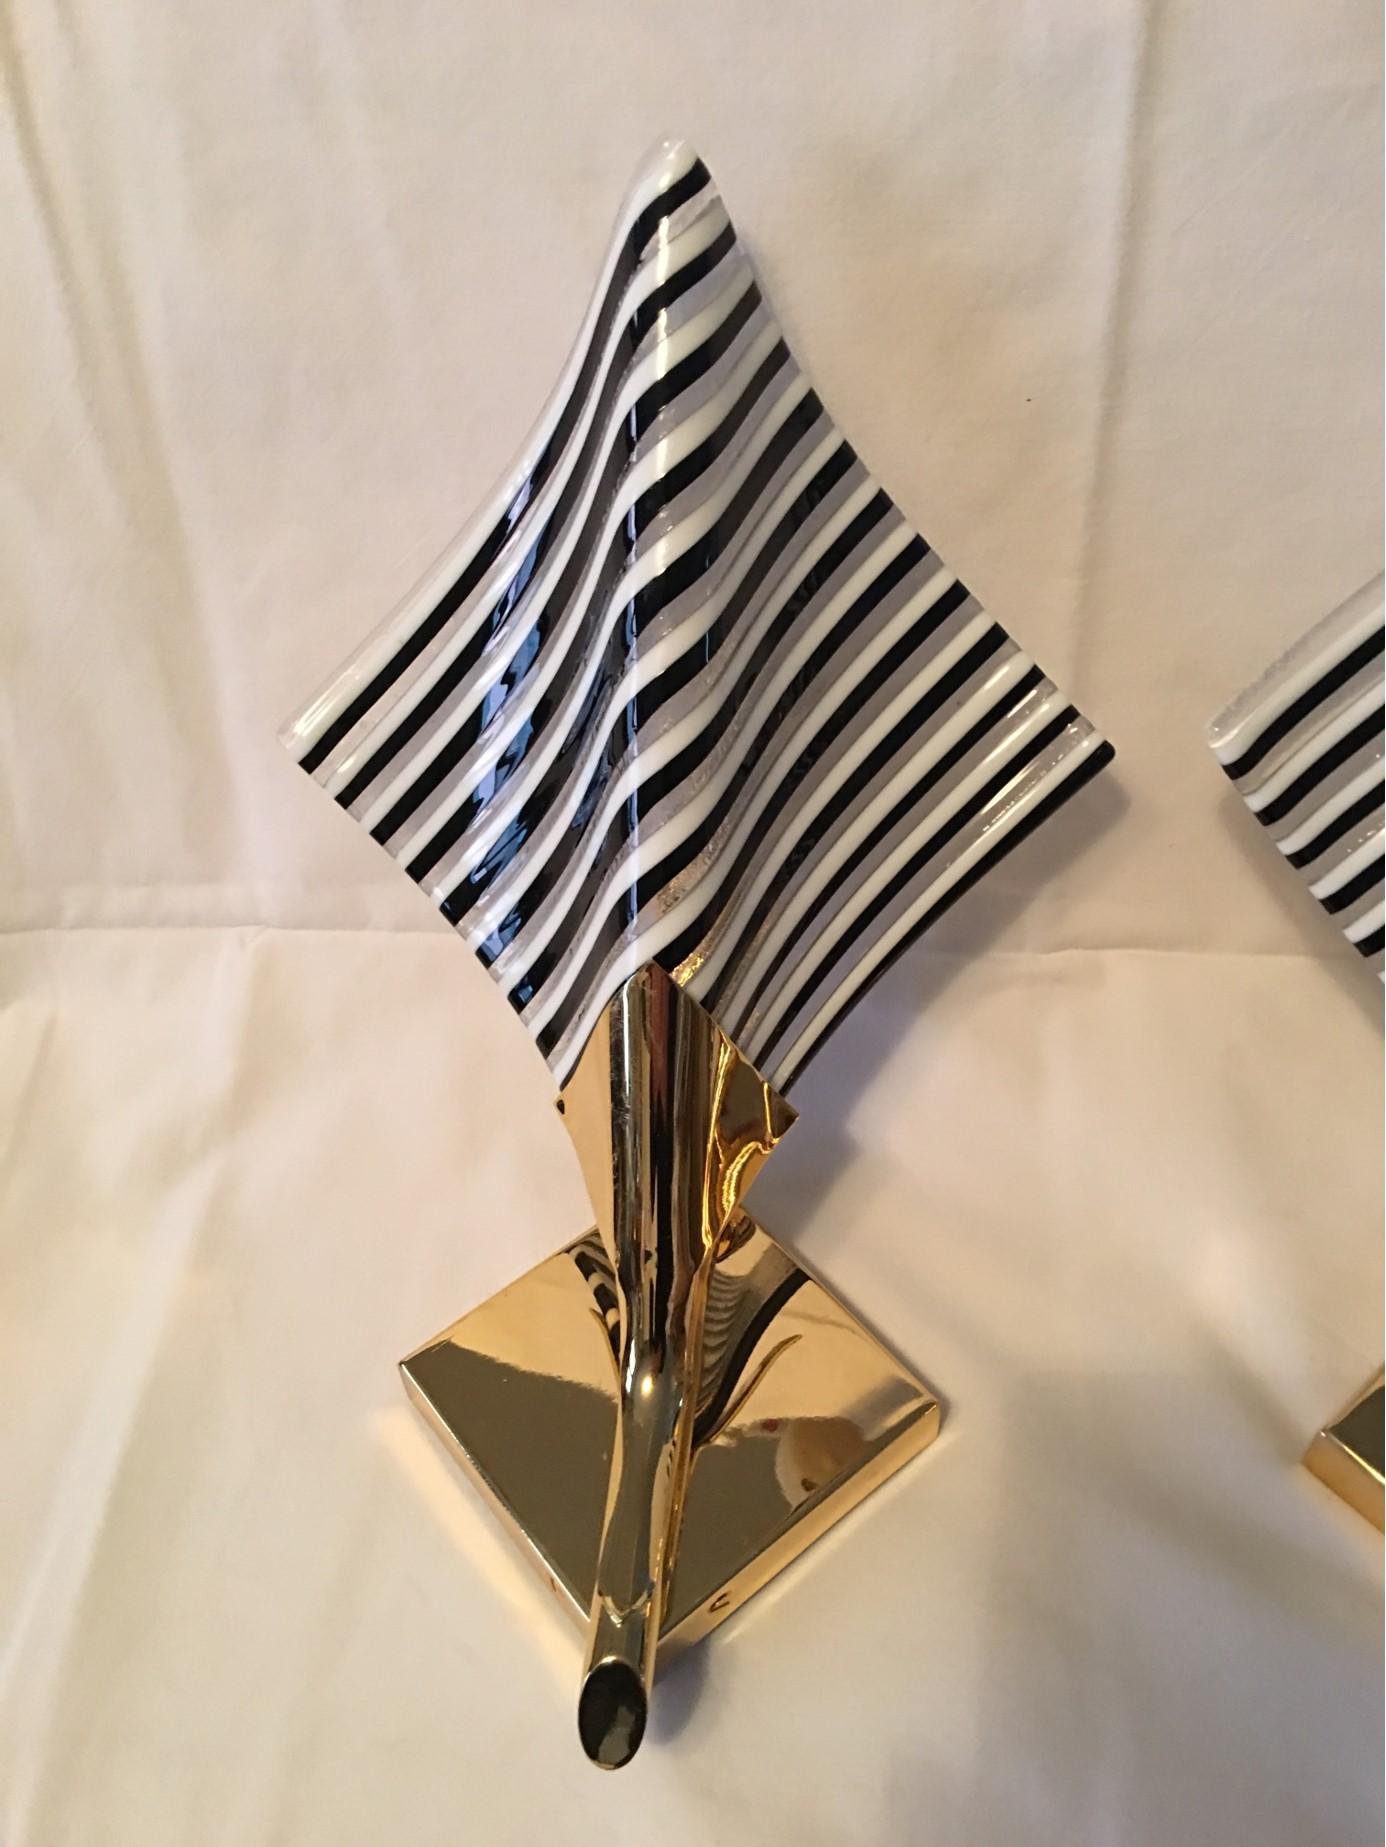 Set of Gilten Metal and Striped Glass Sconces Murano Style In Good Condition For Sale In Frisco, TX